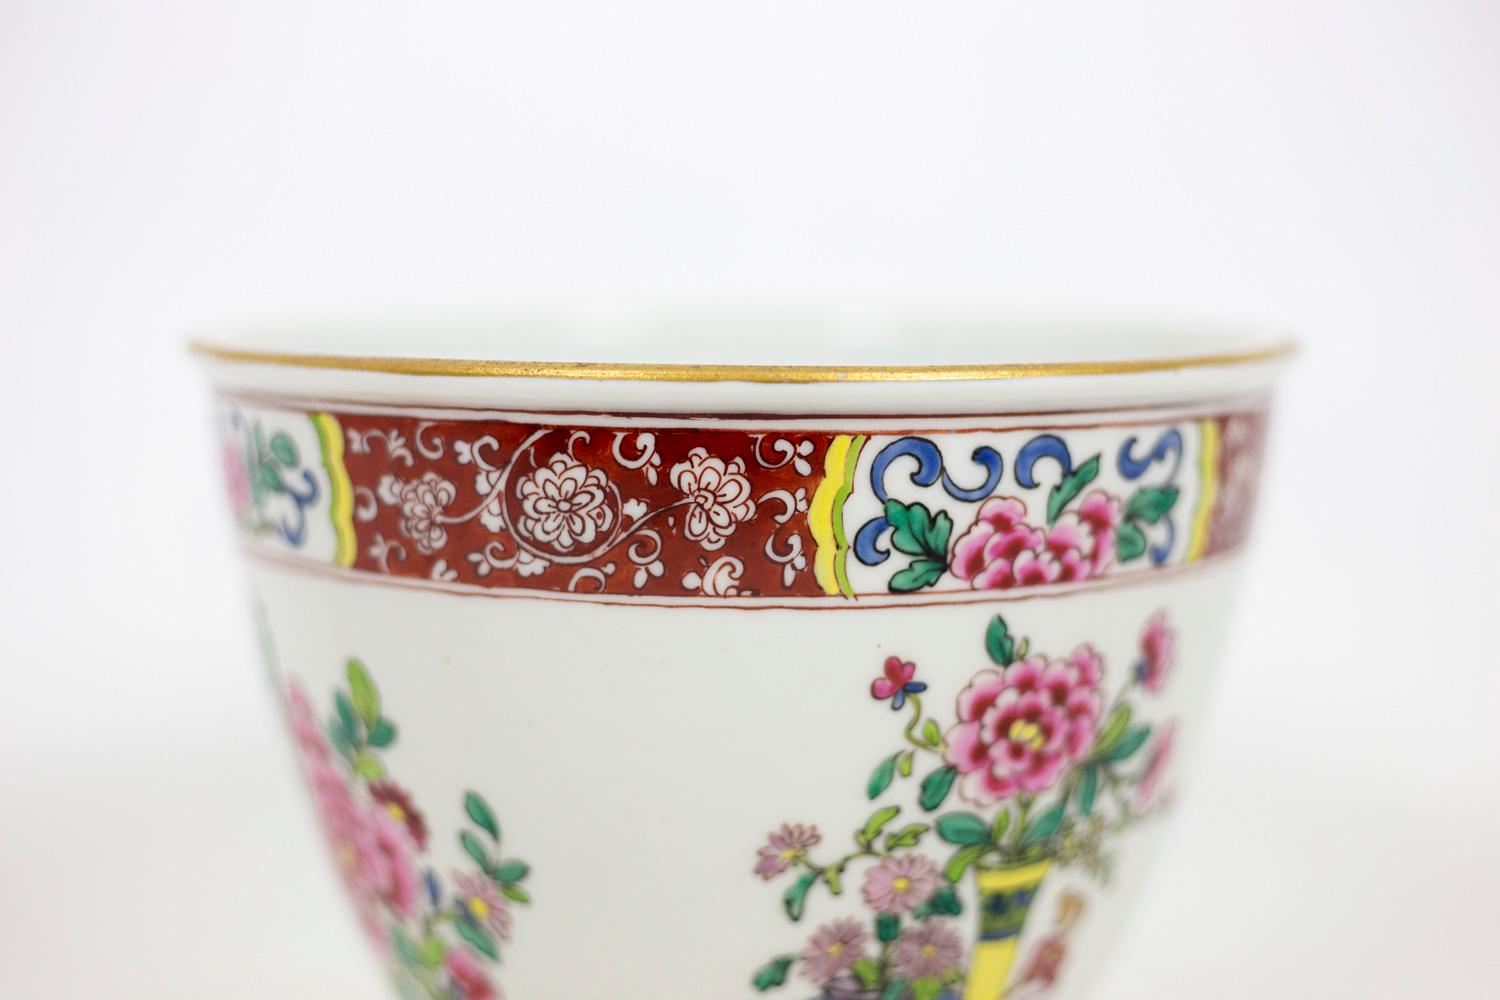 Planter in Samson porcelain. White background and vegetal decor in polychrome enamels representing chrysanthemums, peonies and cherry branches, cut or placed in vases. Red frieze with white vegetal scrolls and four cartouches framing flower motifs